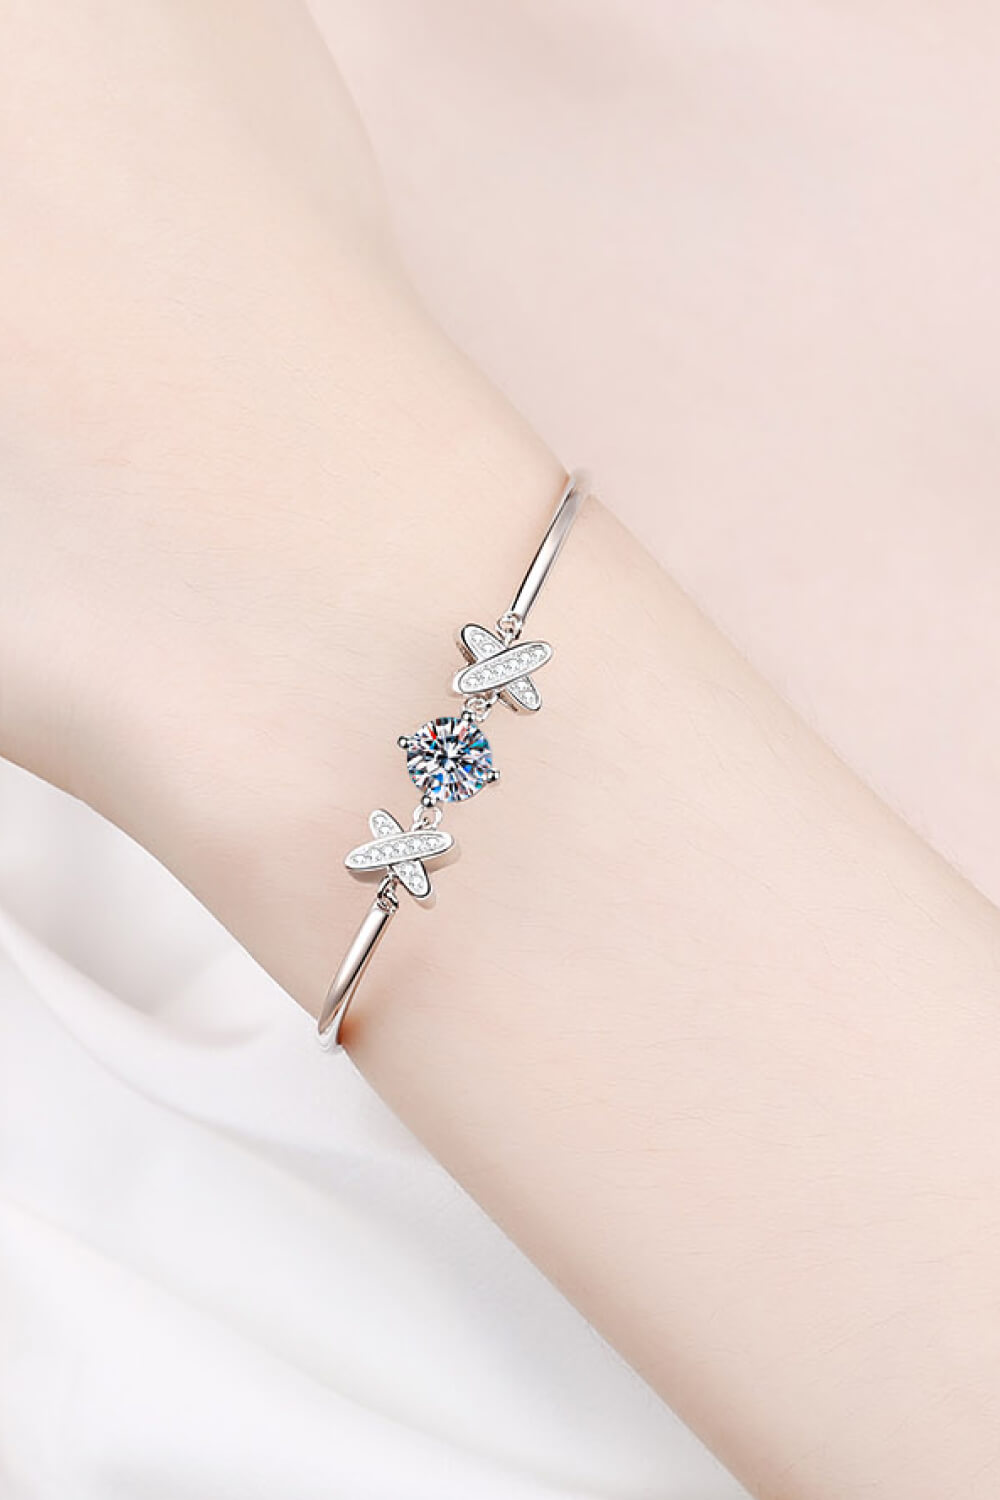 Adored Happy State of Mind 1 Carat Moissanite Bracelet - Kawaii Stop - Adored, Bracelet, Bracelets, Certificate Included, Gift for Her, Jewelry for Women, Luxury Fashion, Moissanite Bracelet, Rhodium-Plated, Ship From Overseas, Sparkling Zircon, Sterling Silver Jewelry, Timeless Elegance